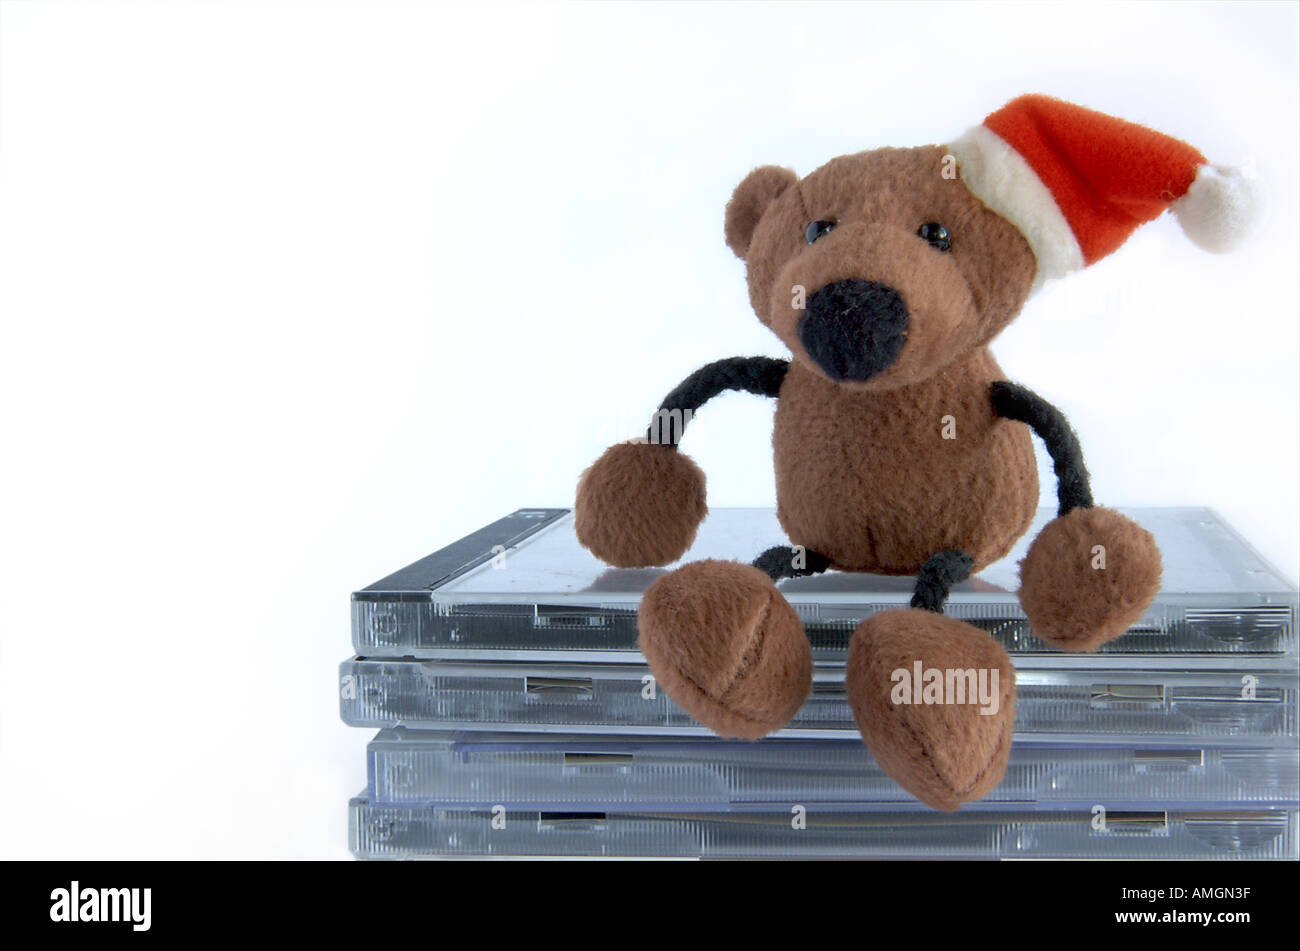 teddy bear sitting on pile of compact discs Stock Photo